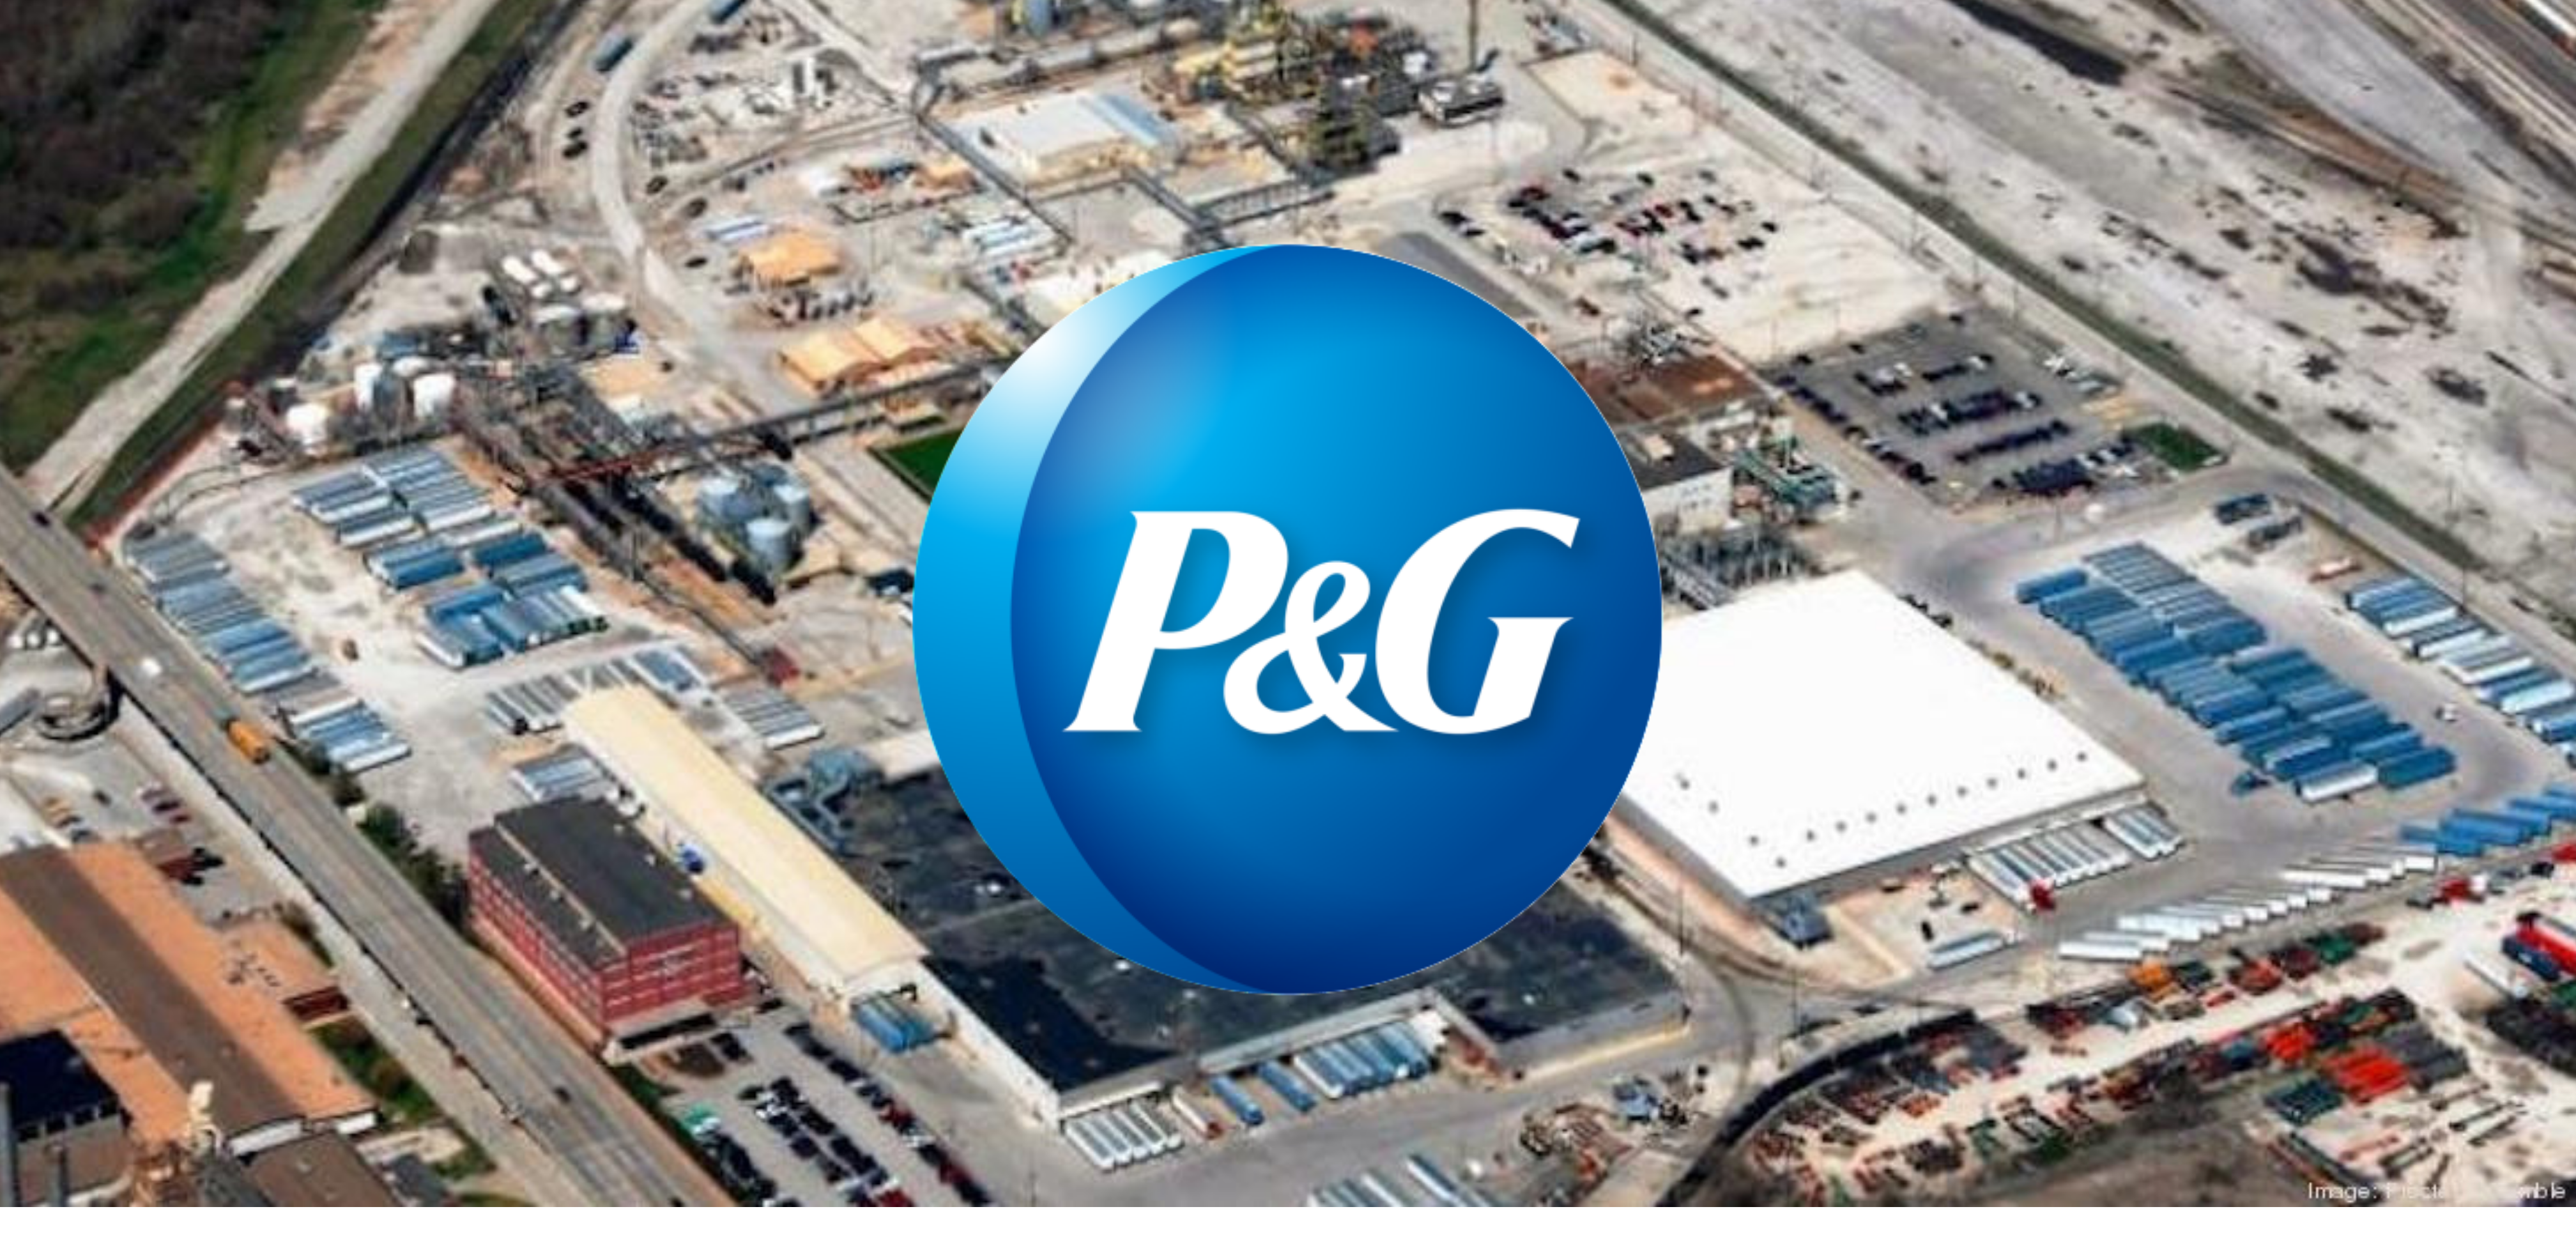 https://www.newmillcapital.com/wp-content/uploads/2020/04/As-KCK-operations-wind-down-Procter-Gamble-sells-plant-to-New-Mill-Capital.png